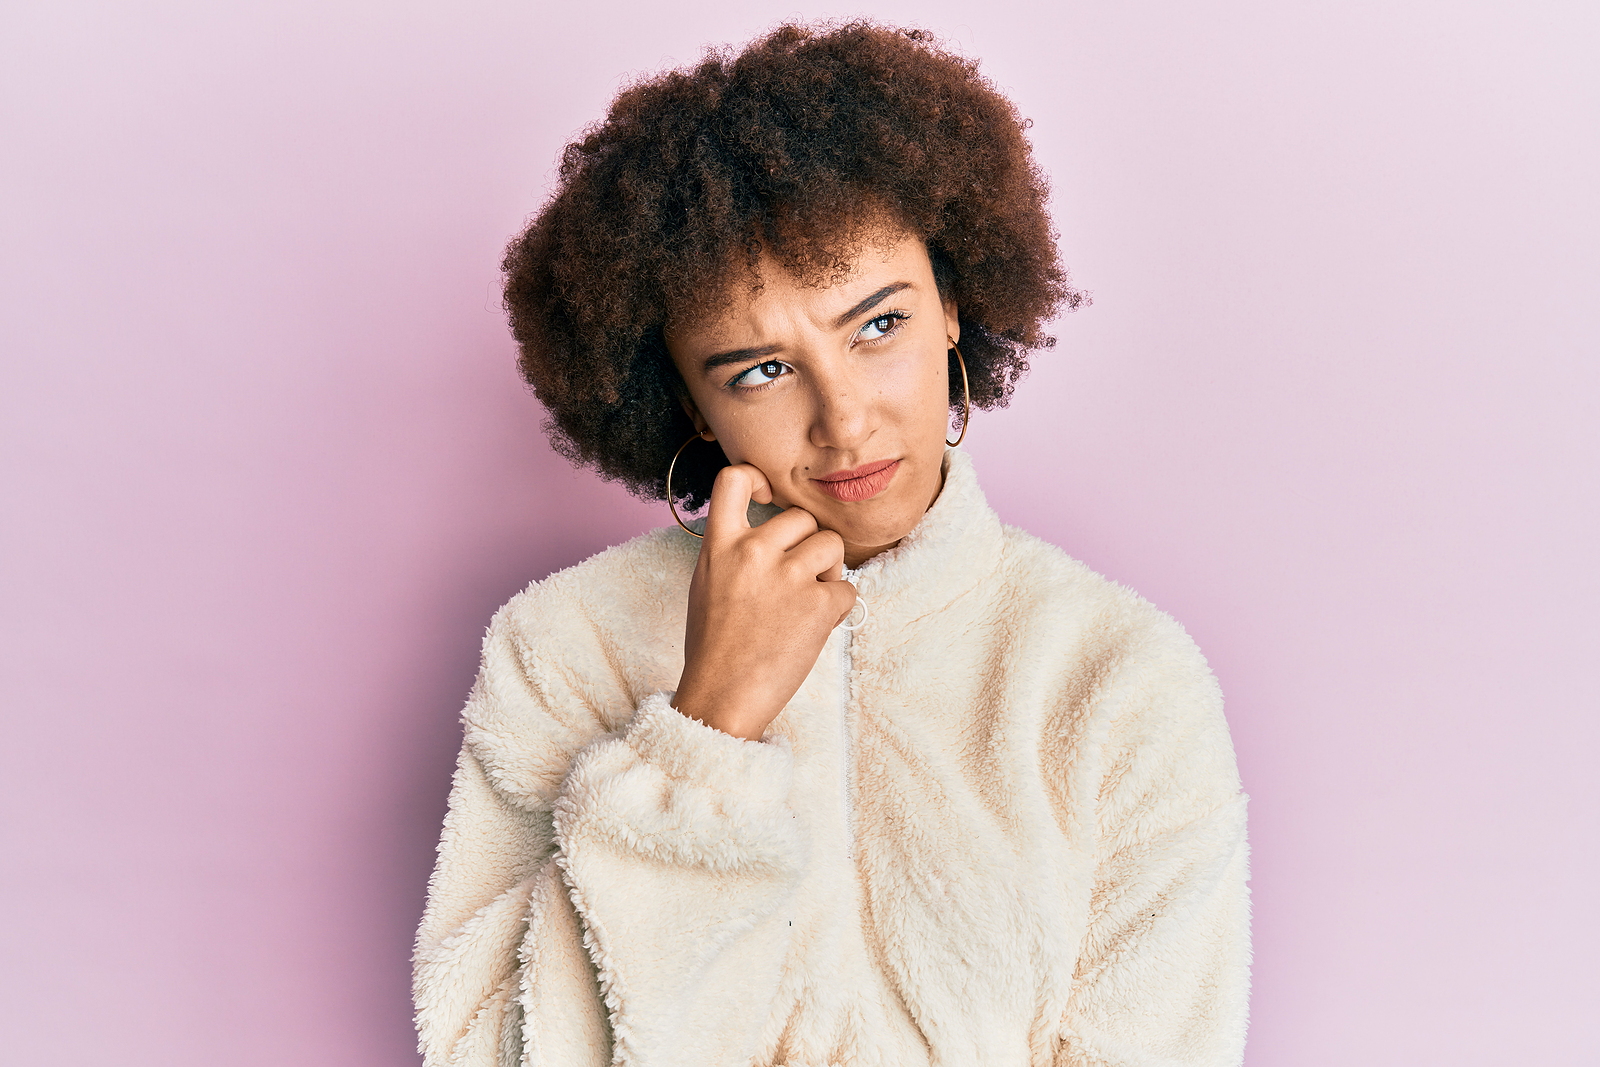 An attractive woman with large curls and puffy sweater looks pensive to the side. In front of a plain background.